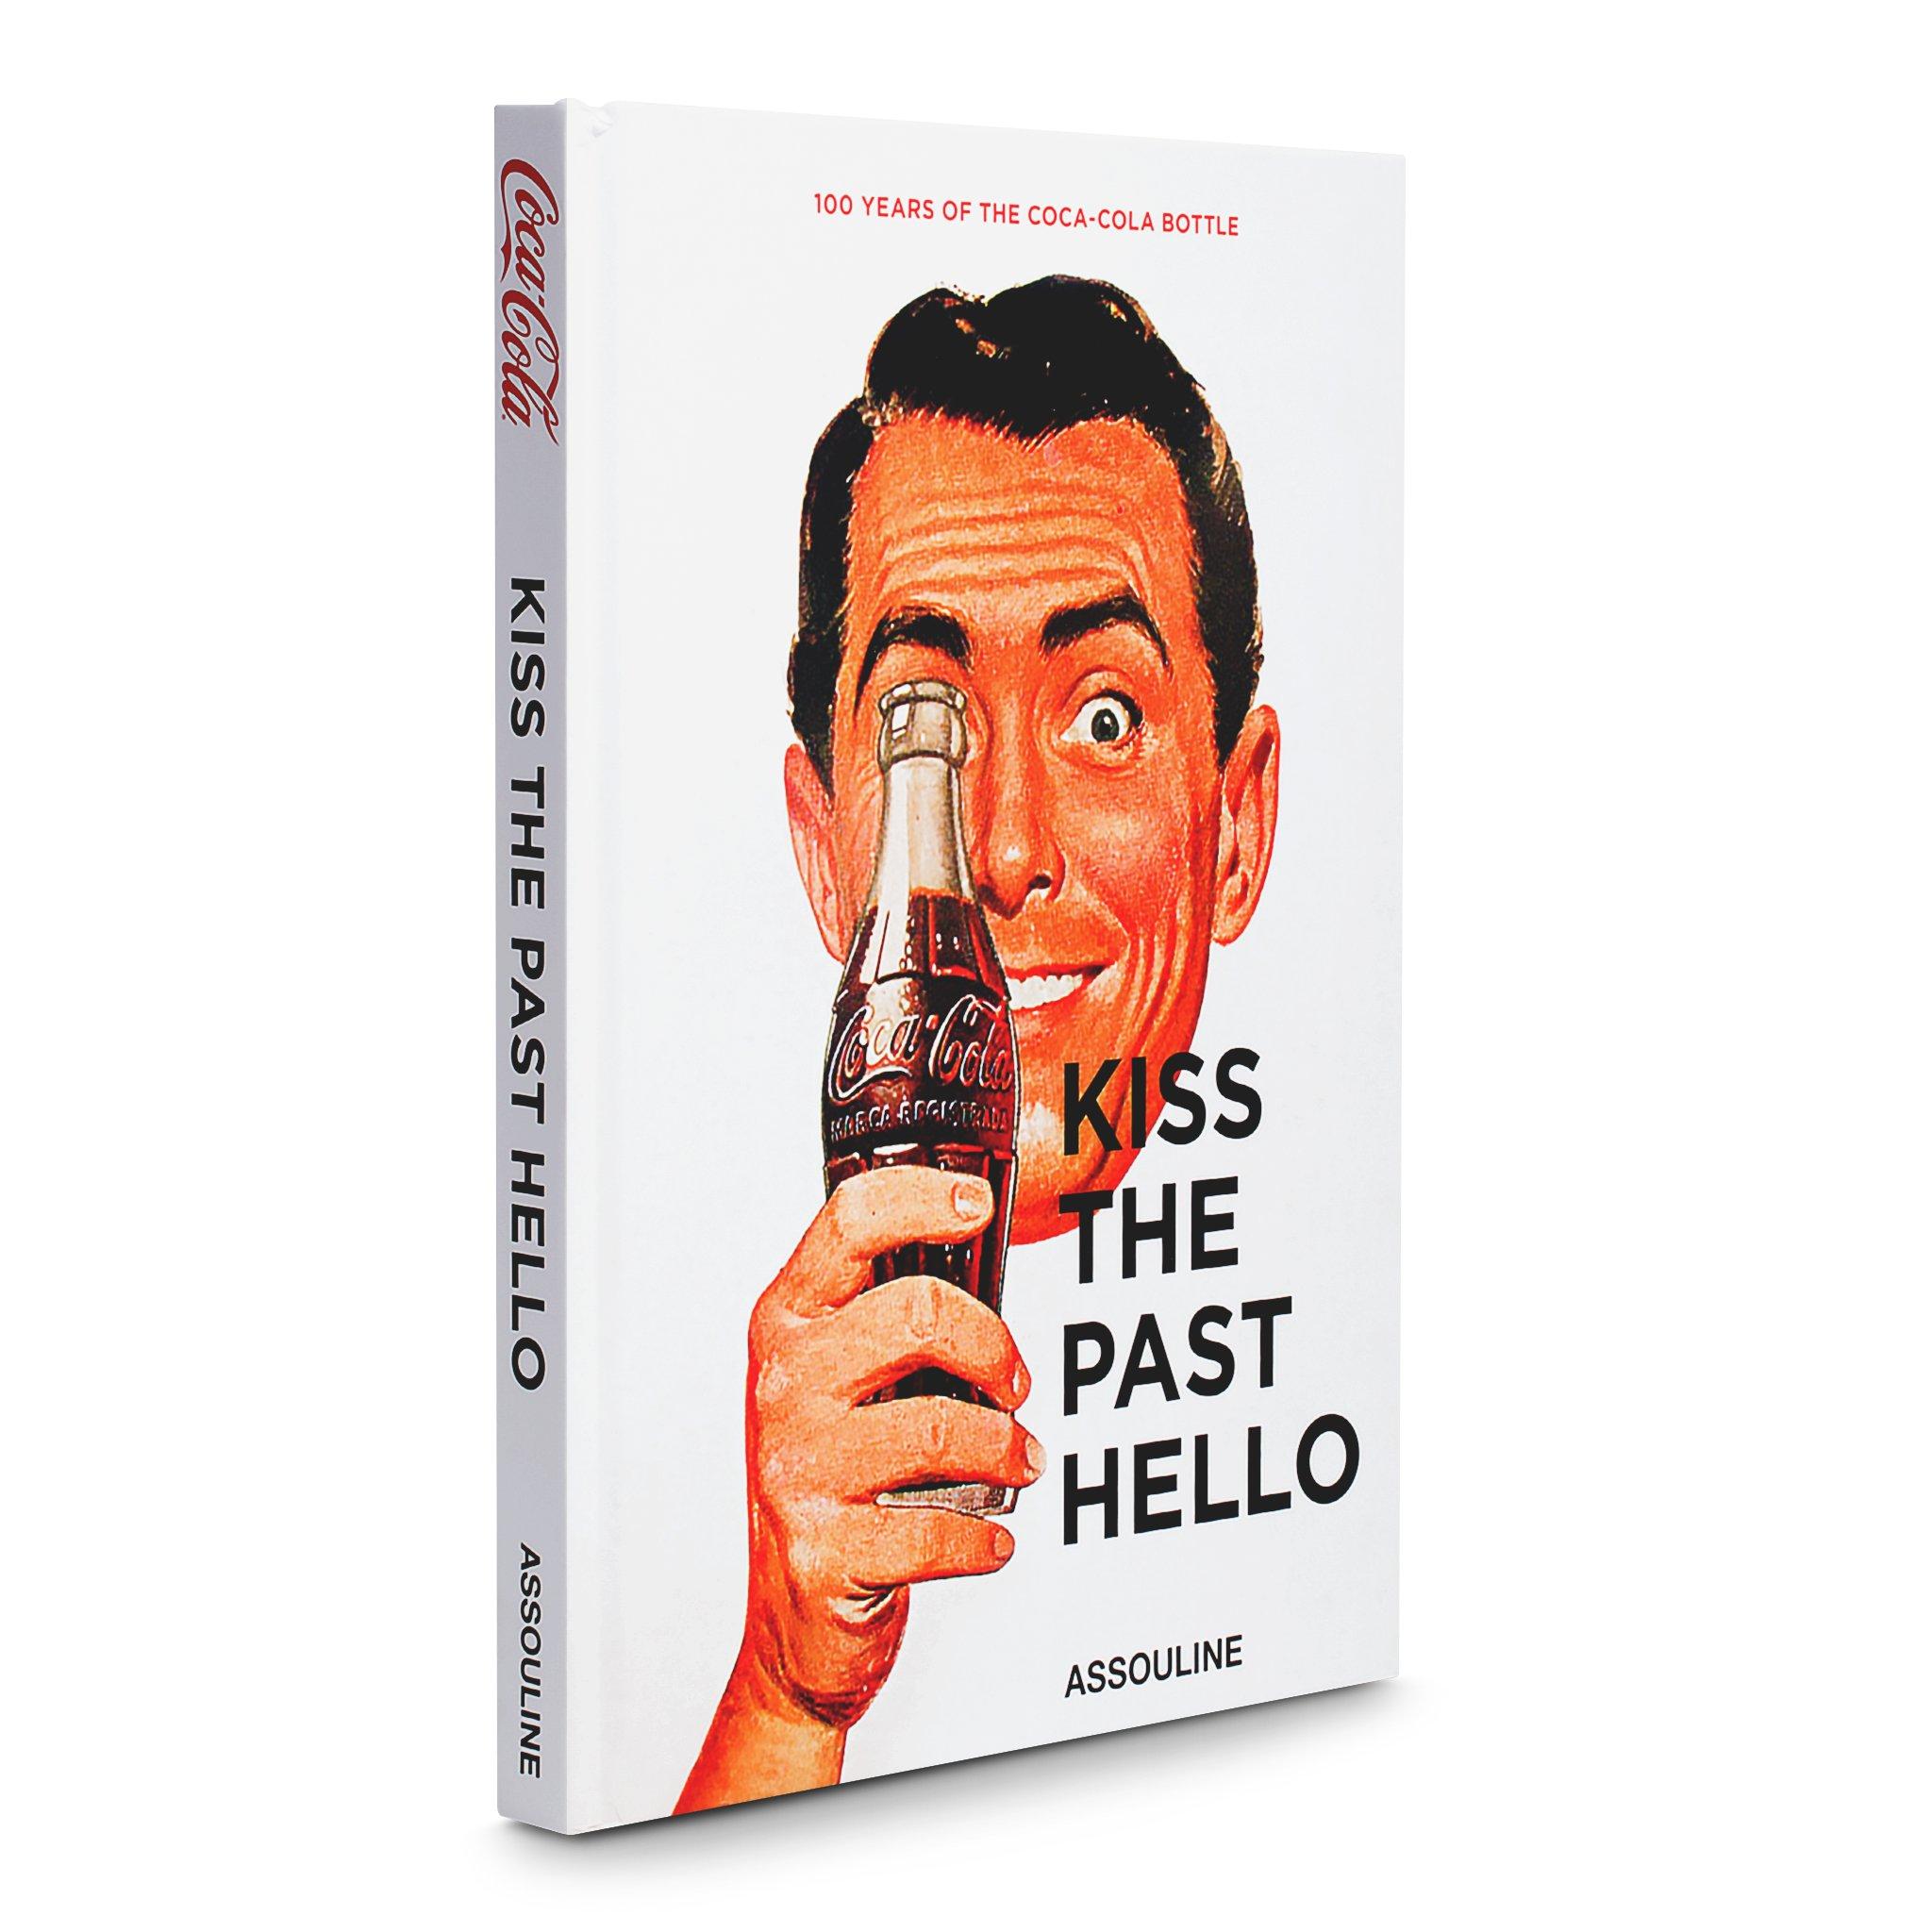 Modern In Stock in Los Angeles, Coca-Cola Kiss the past Hello by Stephen Bayley